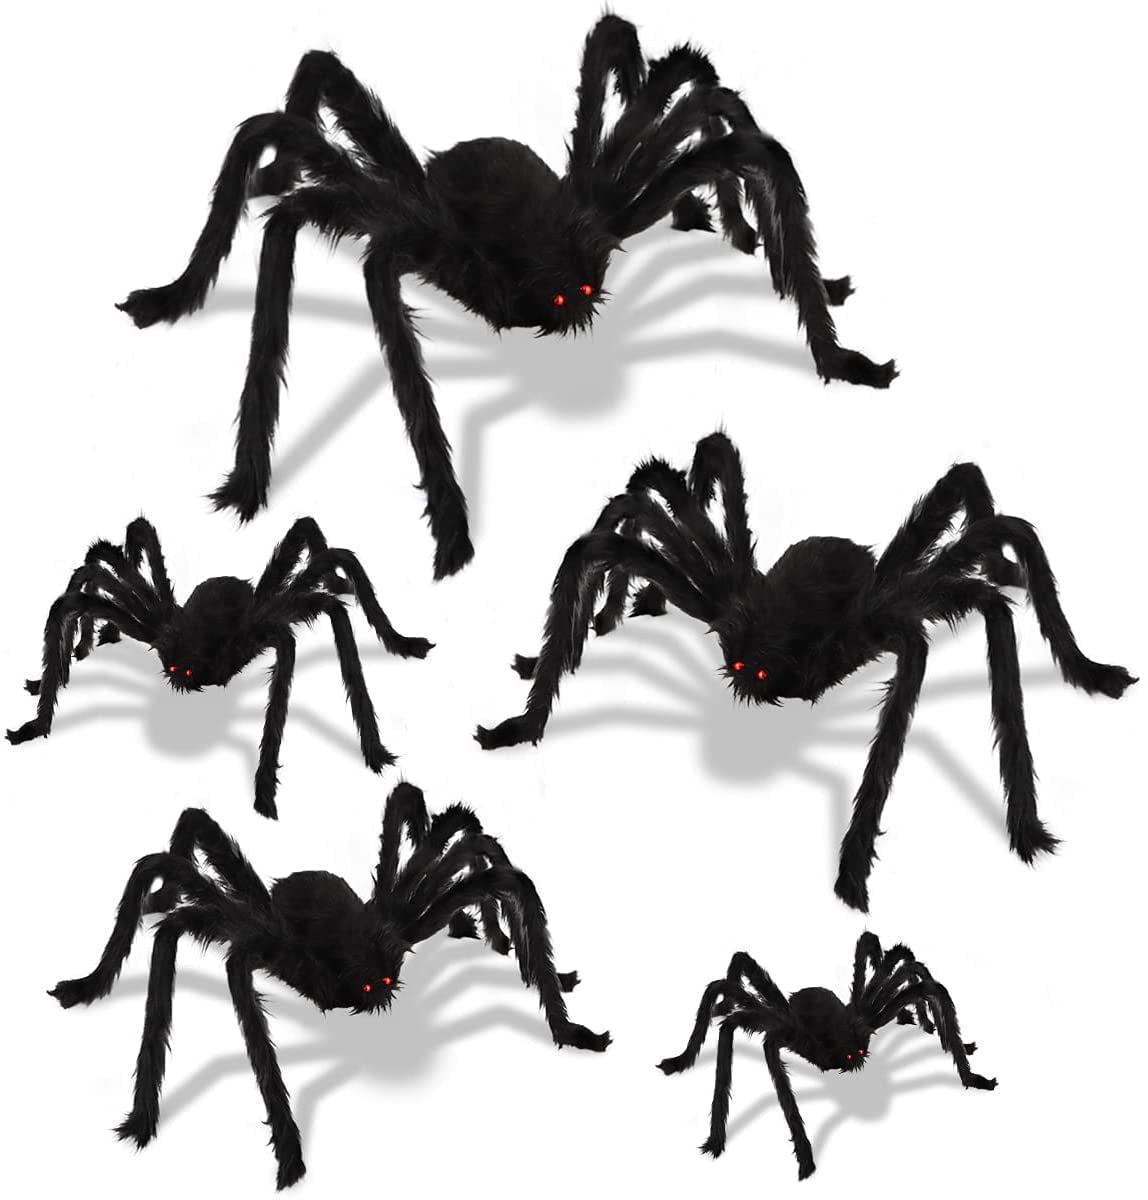 HALLOWEEN SPOOKY SPIDERS DECORATION FANCY DRESS PACK OF 6 SCARY SPIDER SET 